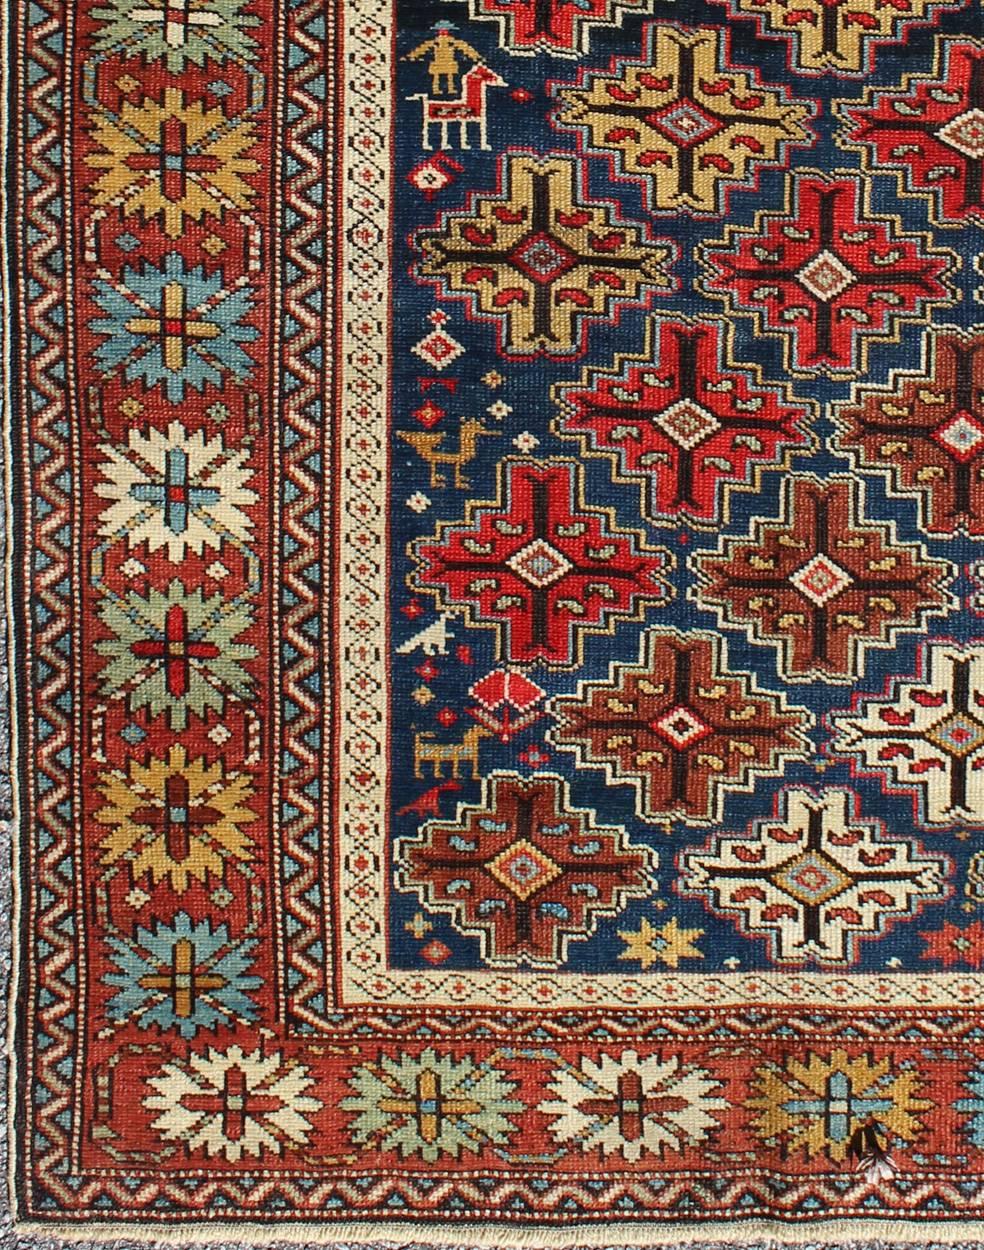 This colorful blossom carpet from Shirvan features an all-over pattern woven with a well-preserved and vibrant color palette. Exquisitely intricate designs are featured all over in the center field and borders.
Dimensions: 3'8 x 4'10.